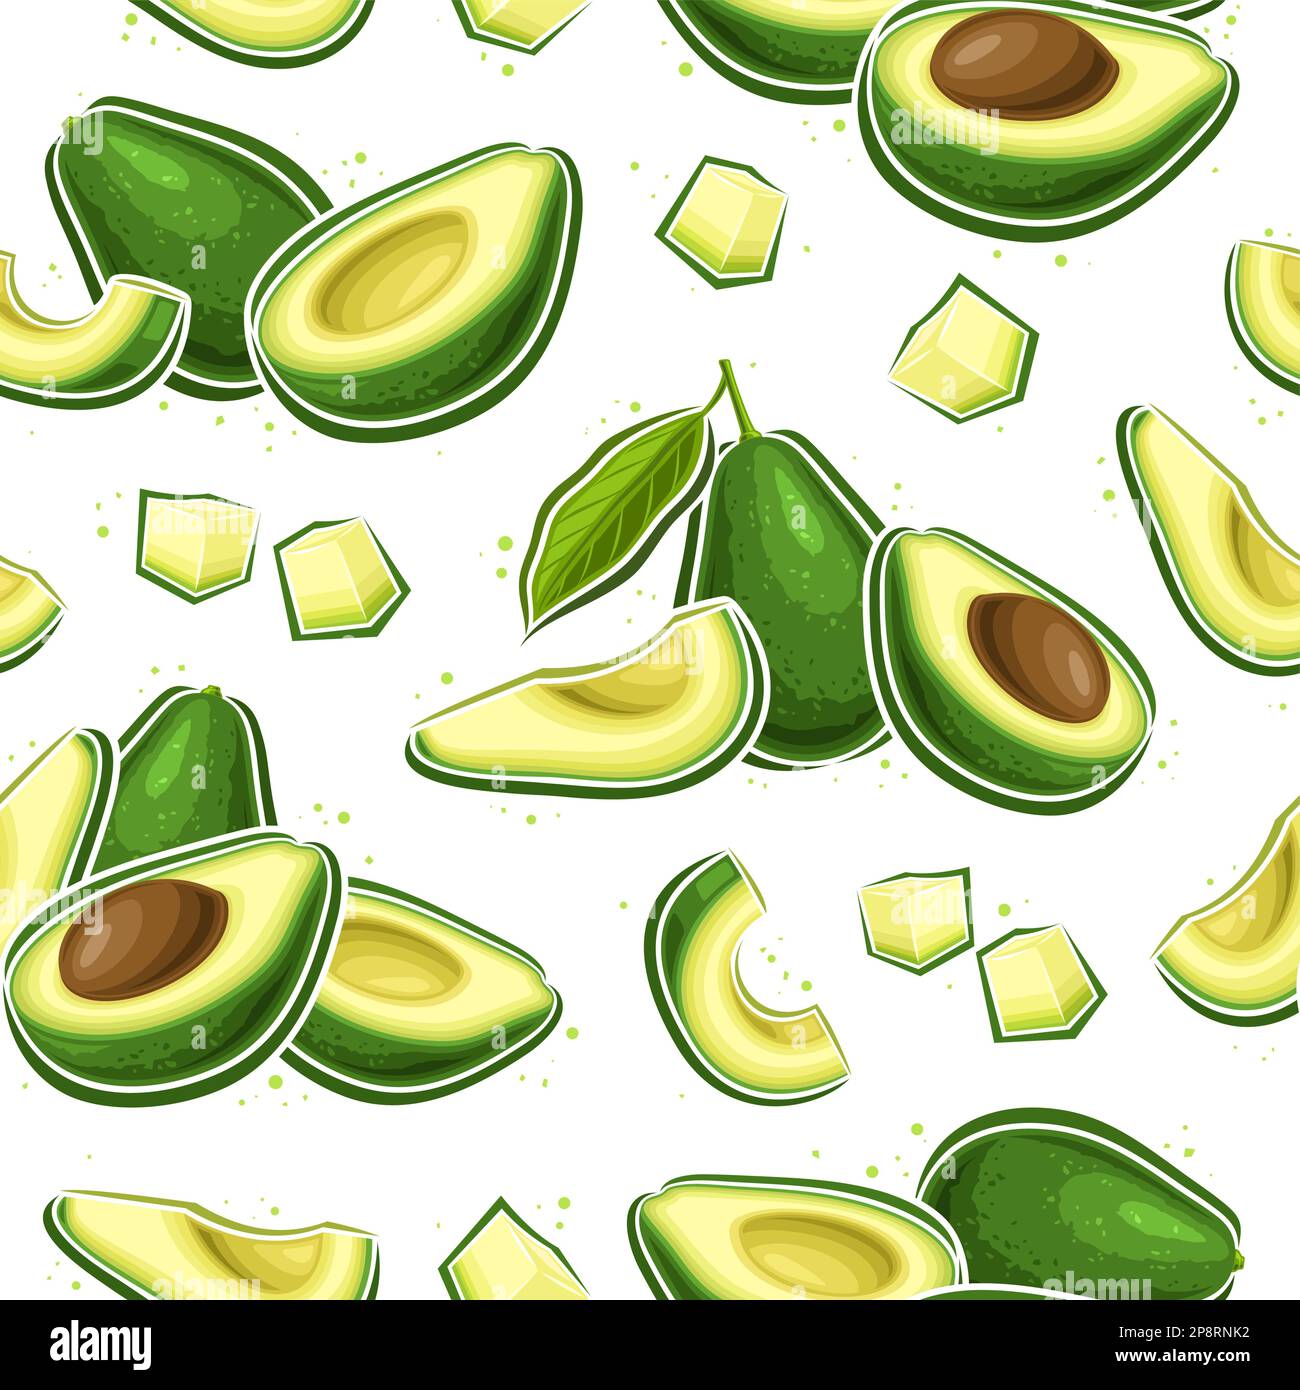 Vector Avocado Seamless Pattern, decorative repeat background with illustration of avocado still life composition with chopped fruits for wrapping pap Stock Vector